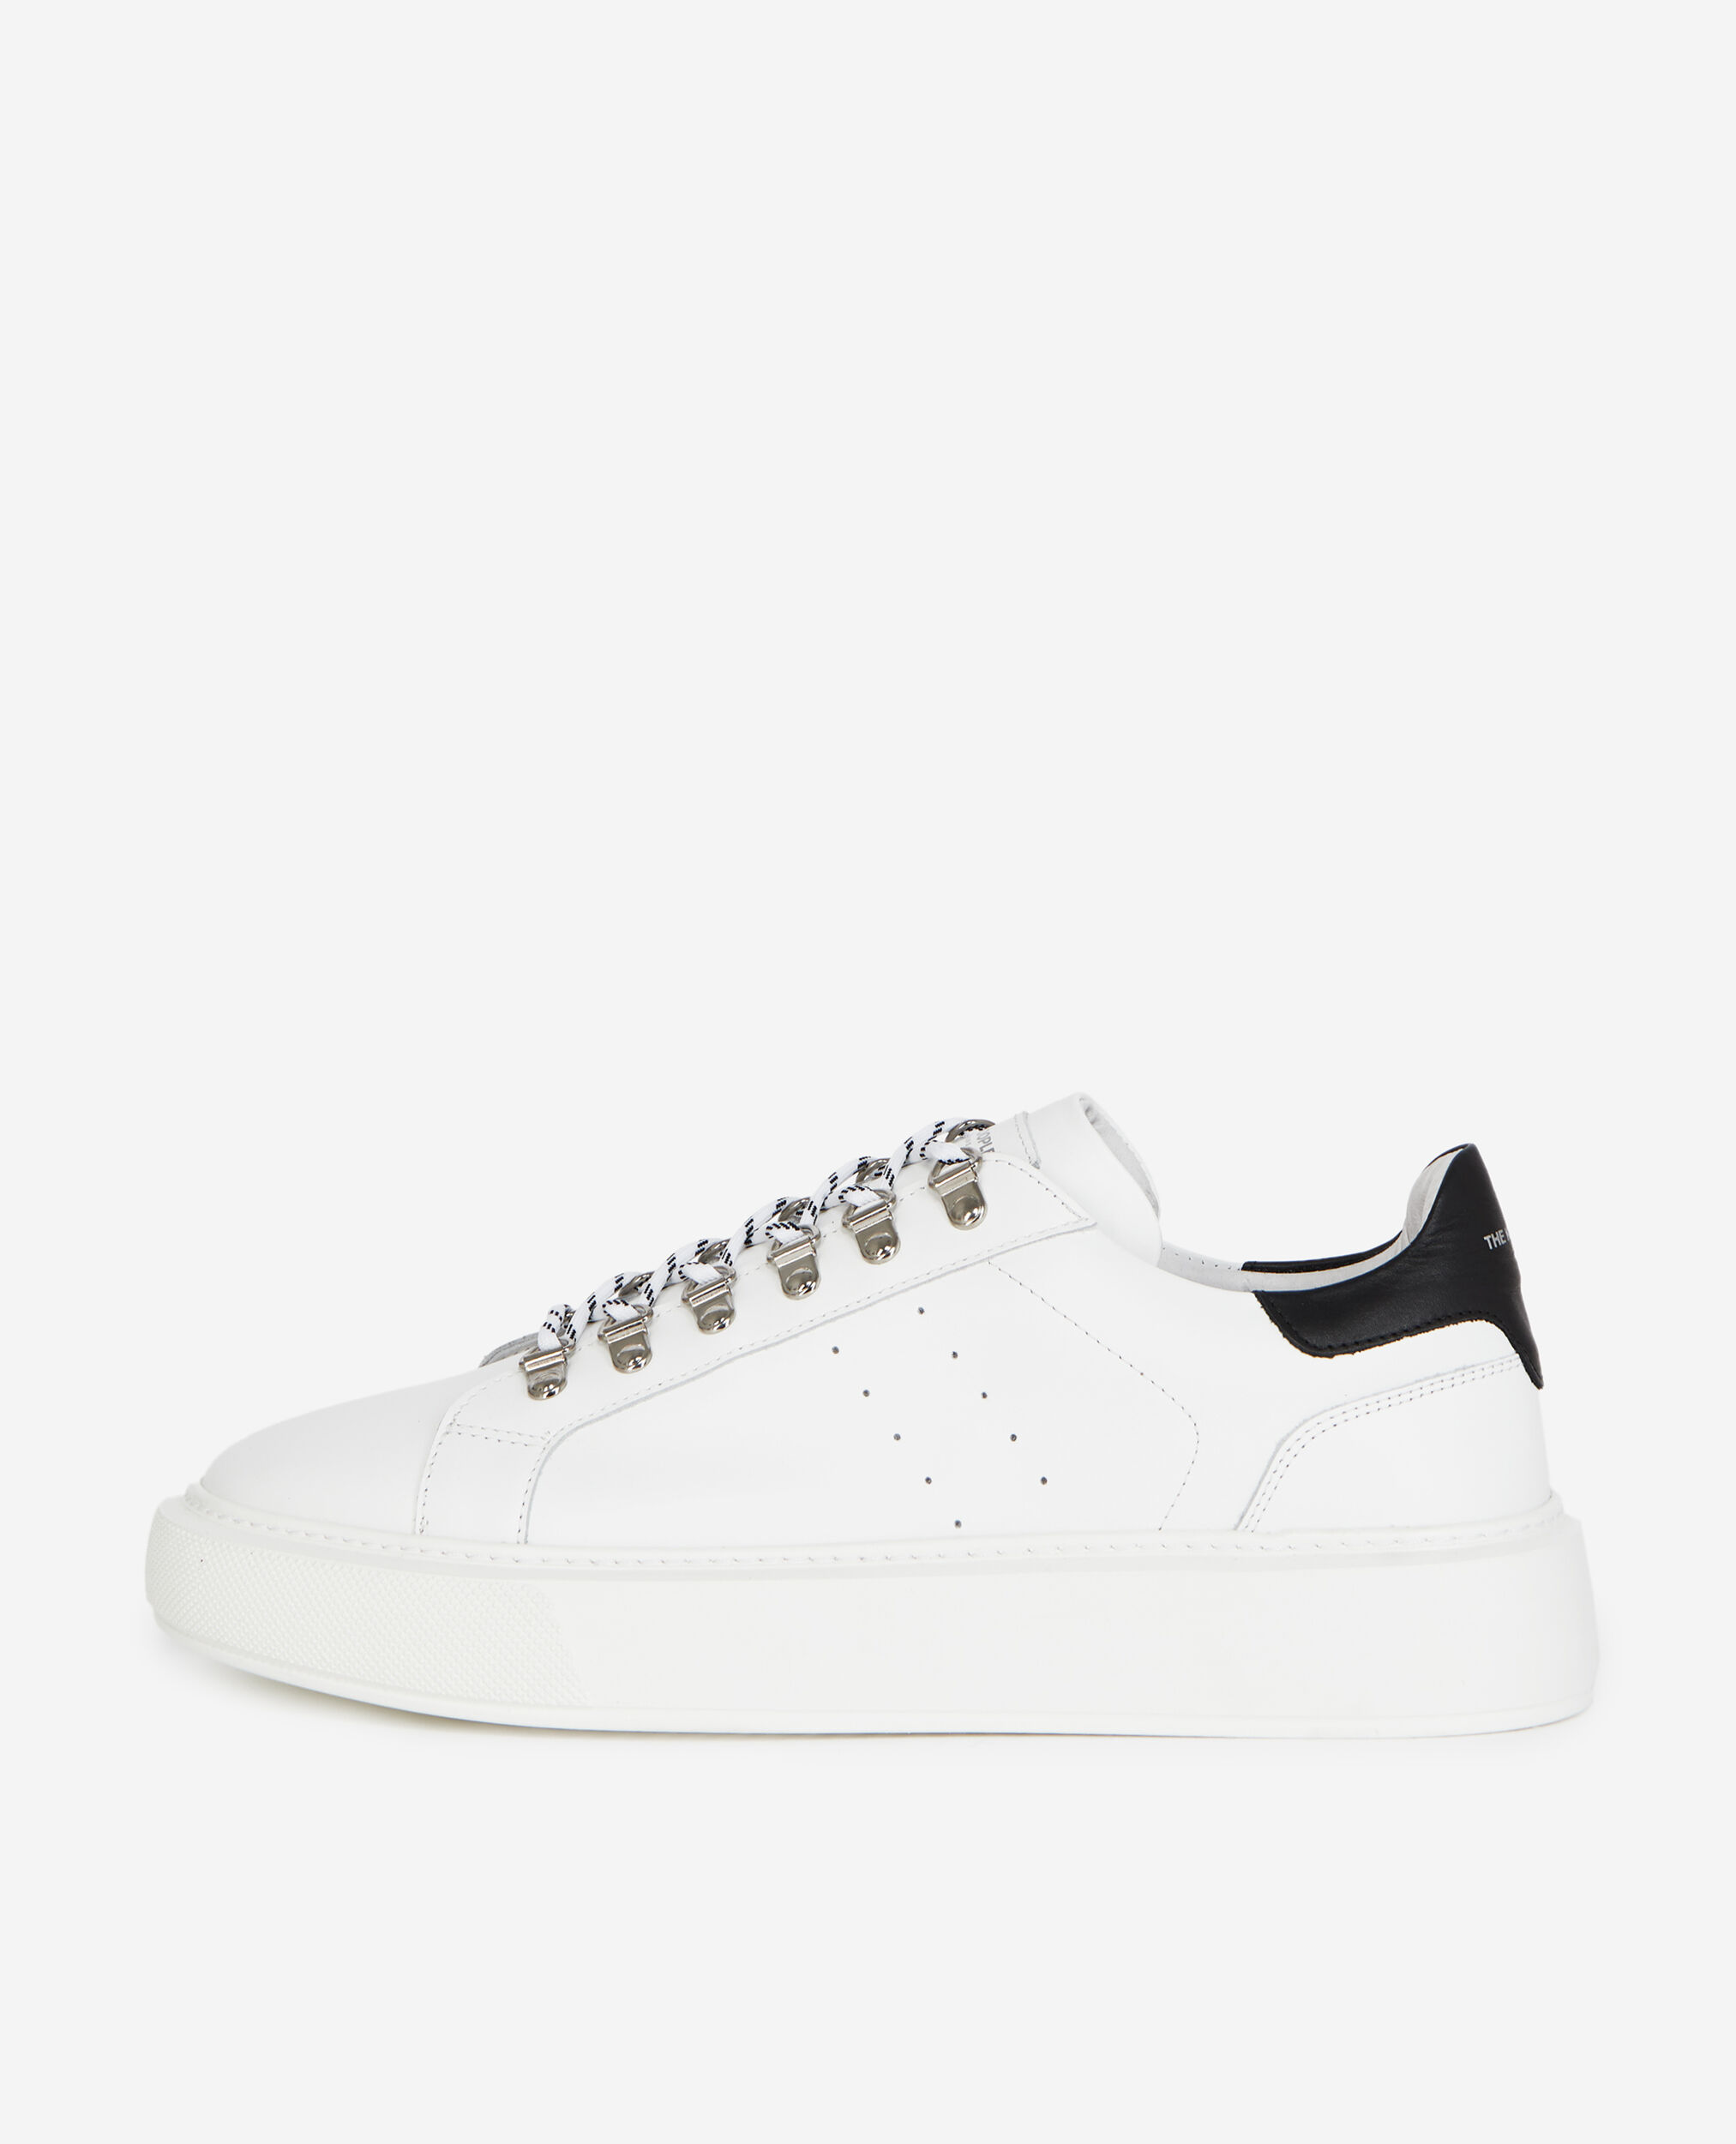 Wedge white sneakers in leather with eyelets, WHITE, hi-res image number null